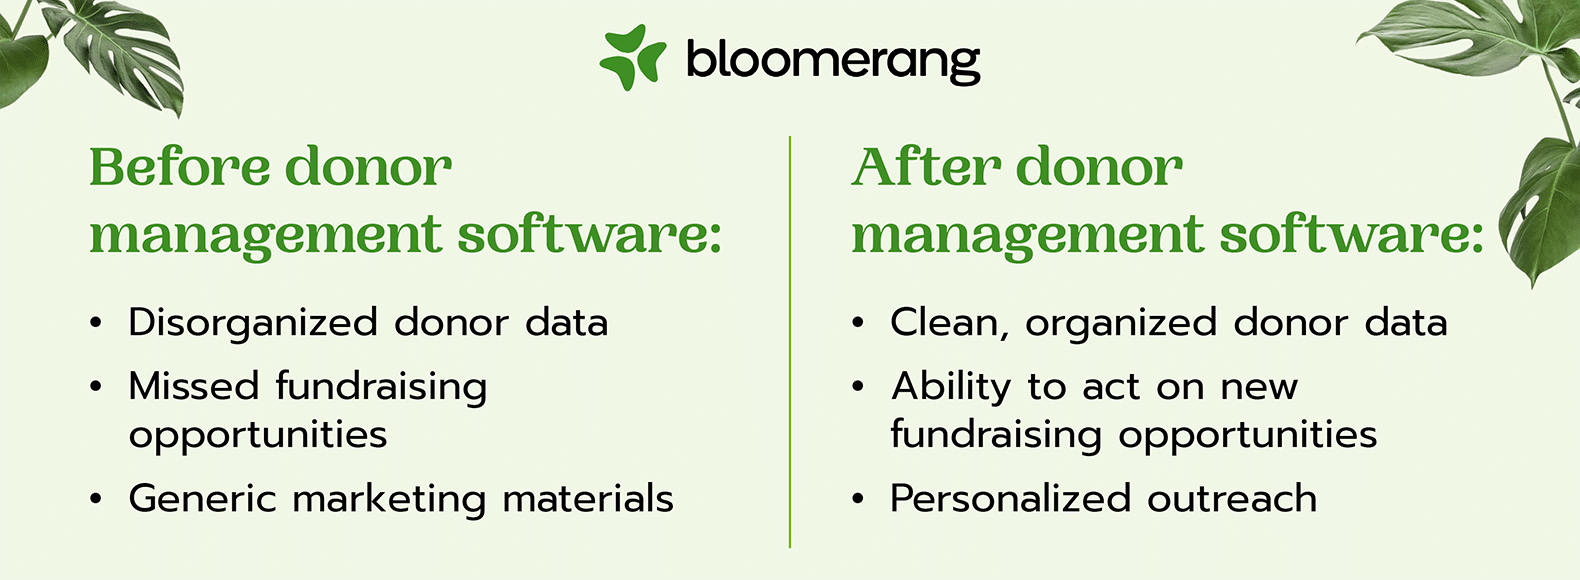 This image shows the benefits of donor management software, outlined in the list below. 